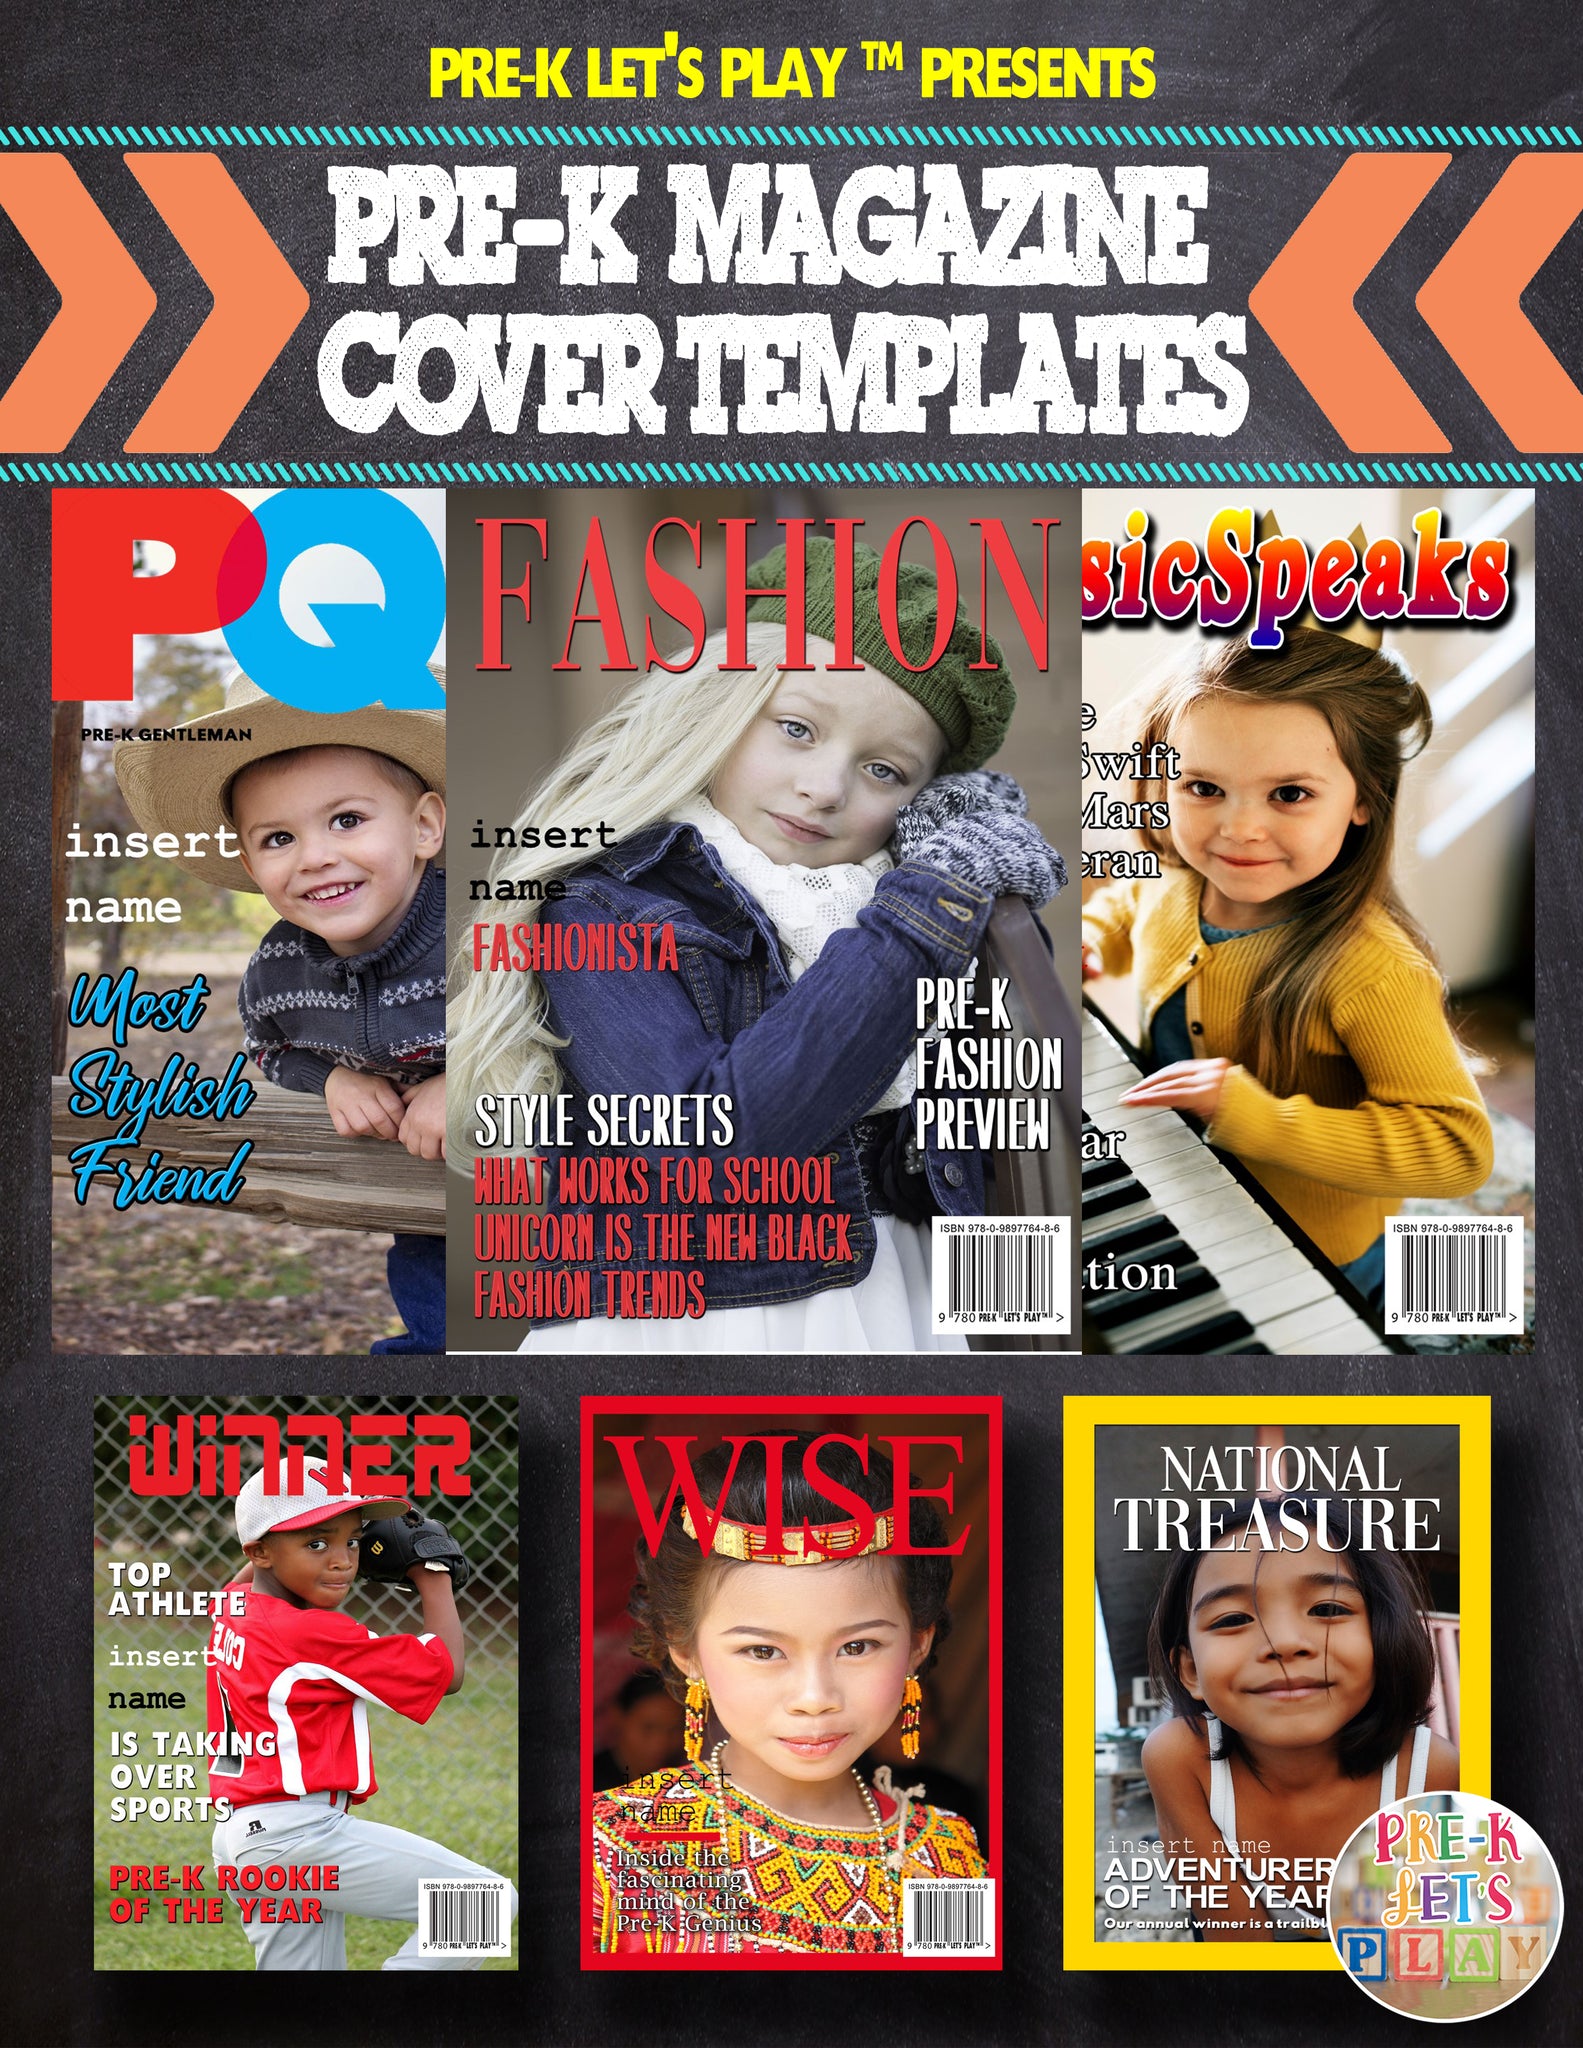 Pre-K Magazine Template Covers | Perfect Family Gift For Graduation or Holiday